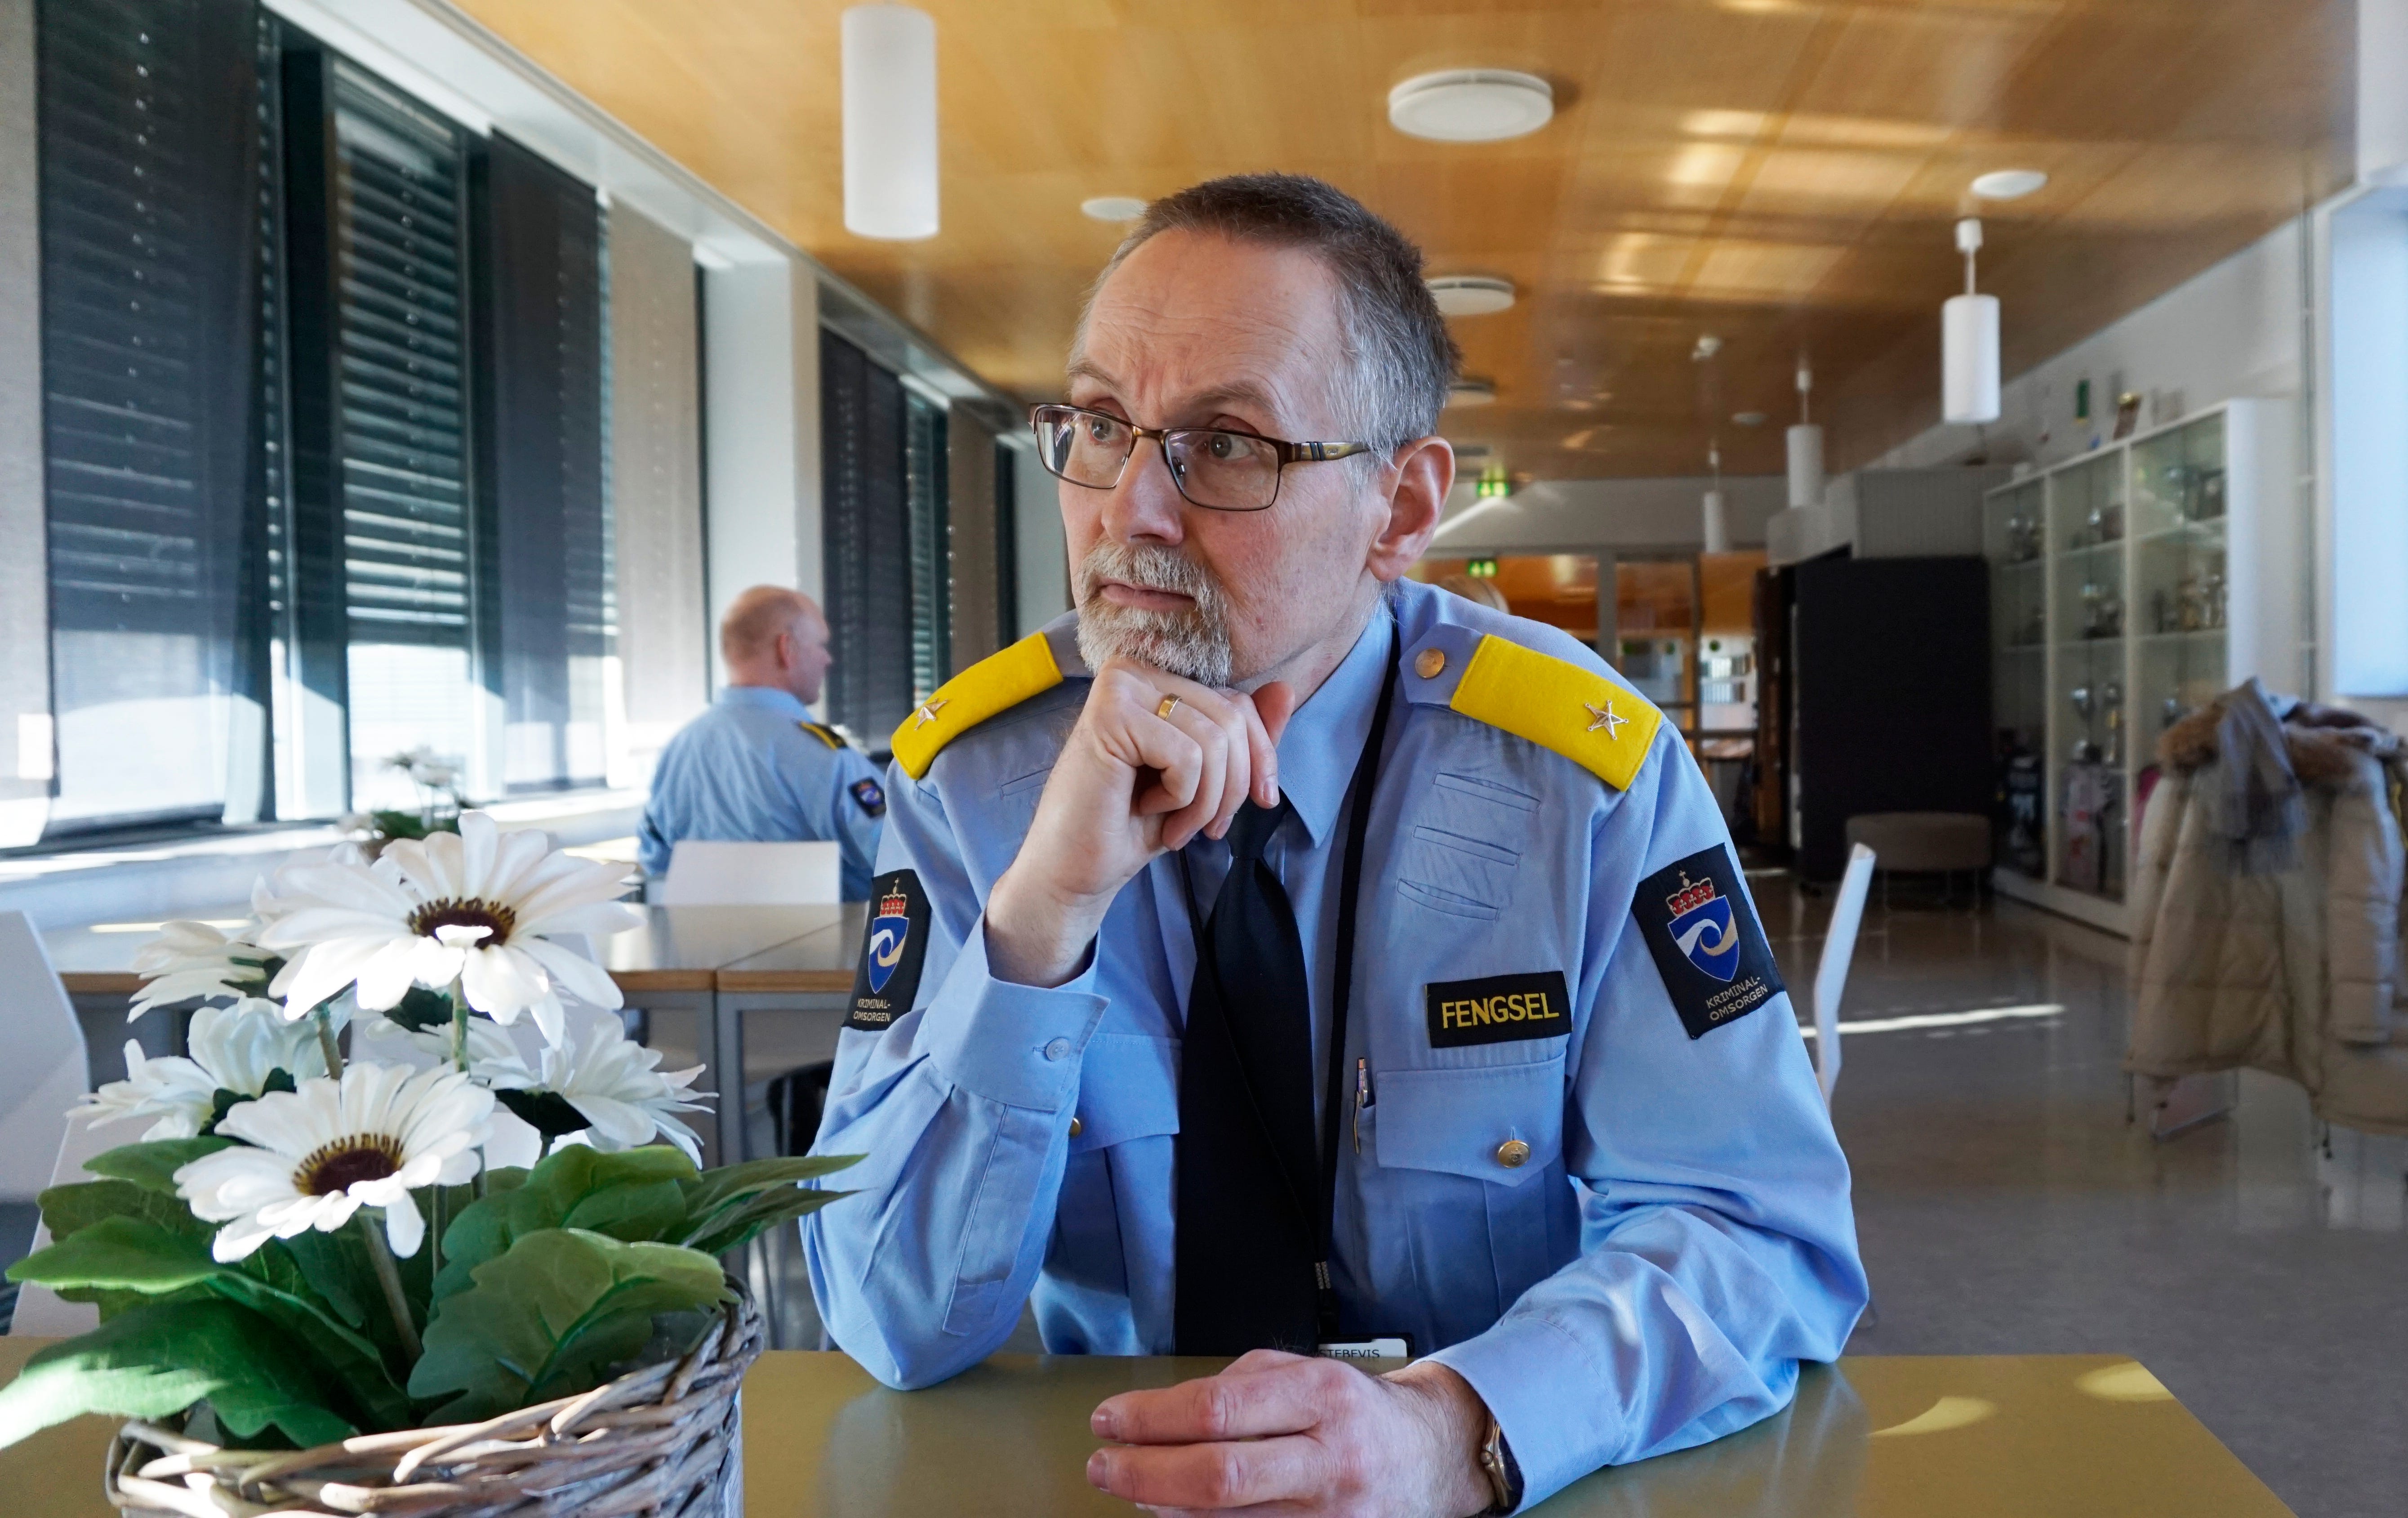 Jan R. Stromnes, deputy governor of Halden Prison in Norway, says his country's correctional system is focused on "normality" and humane treatment.